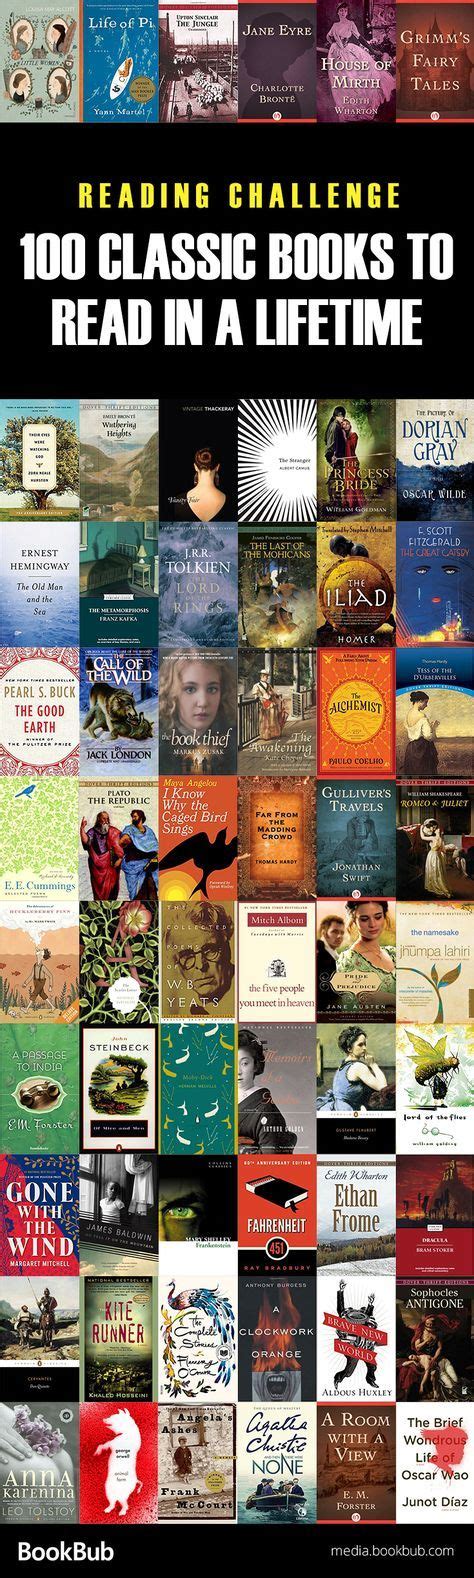 Classic Reading Challenge 100 Classics To Read In A Lifetime This